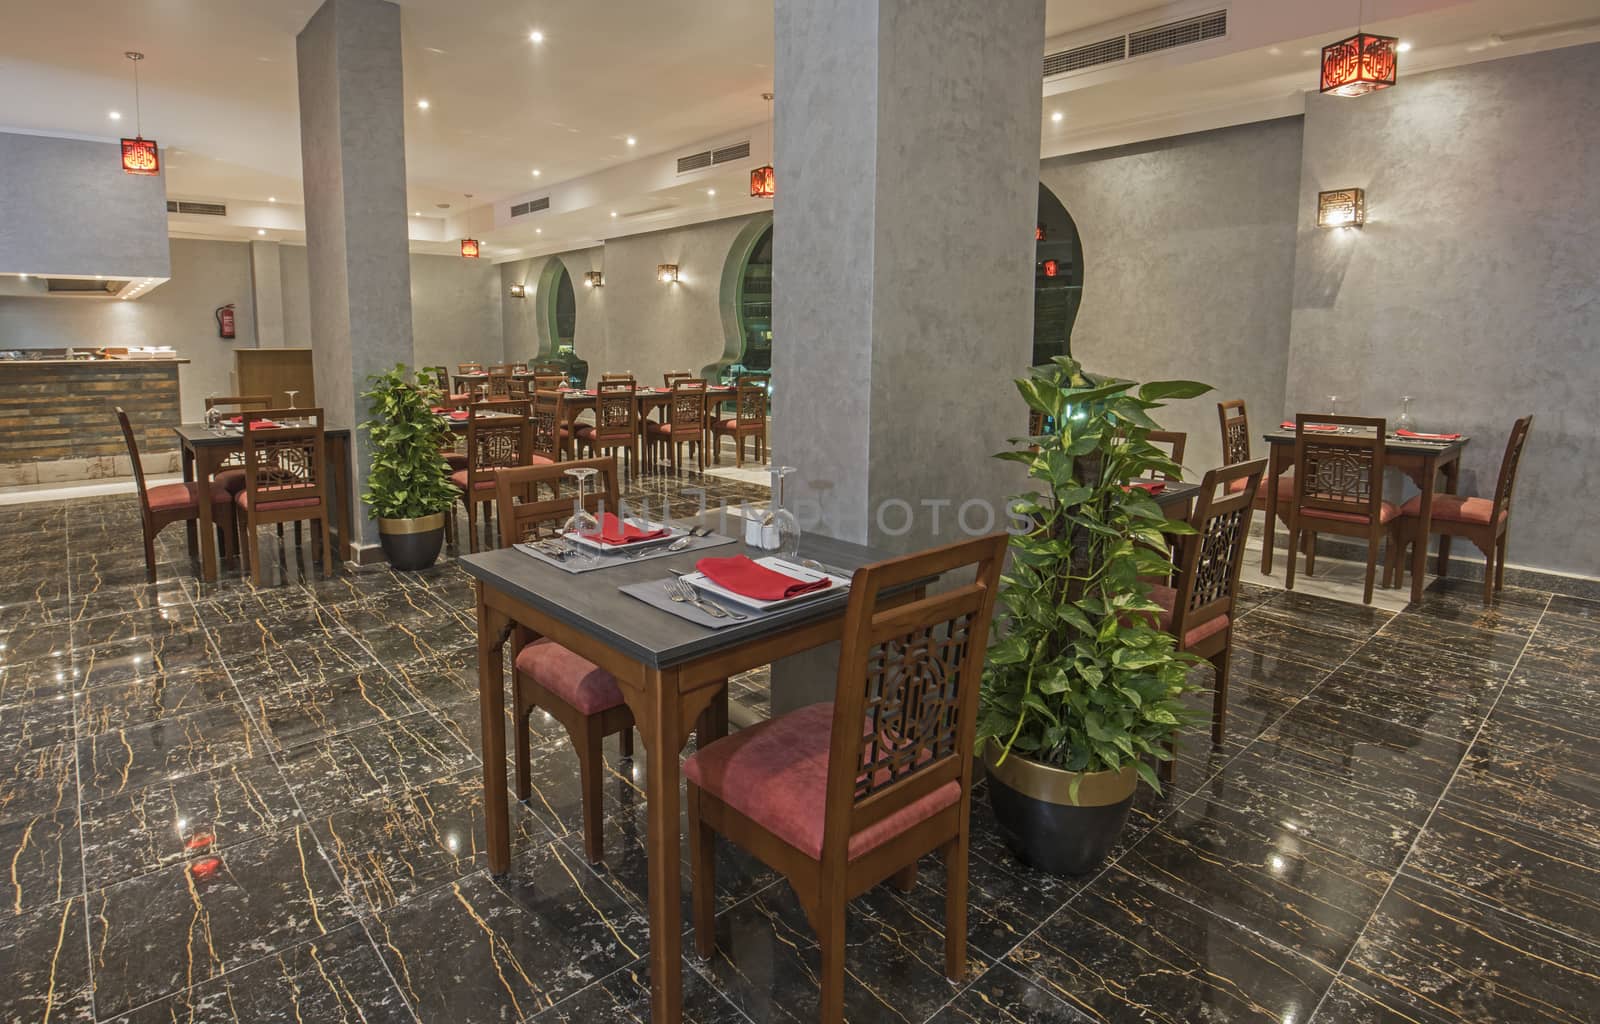 Interior design of a luxury hotel resort Asian restaurant dining area with ornate decor